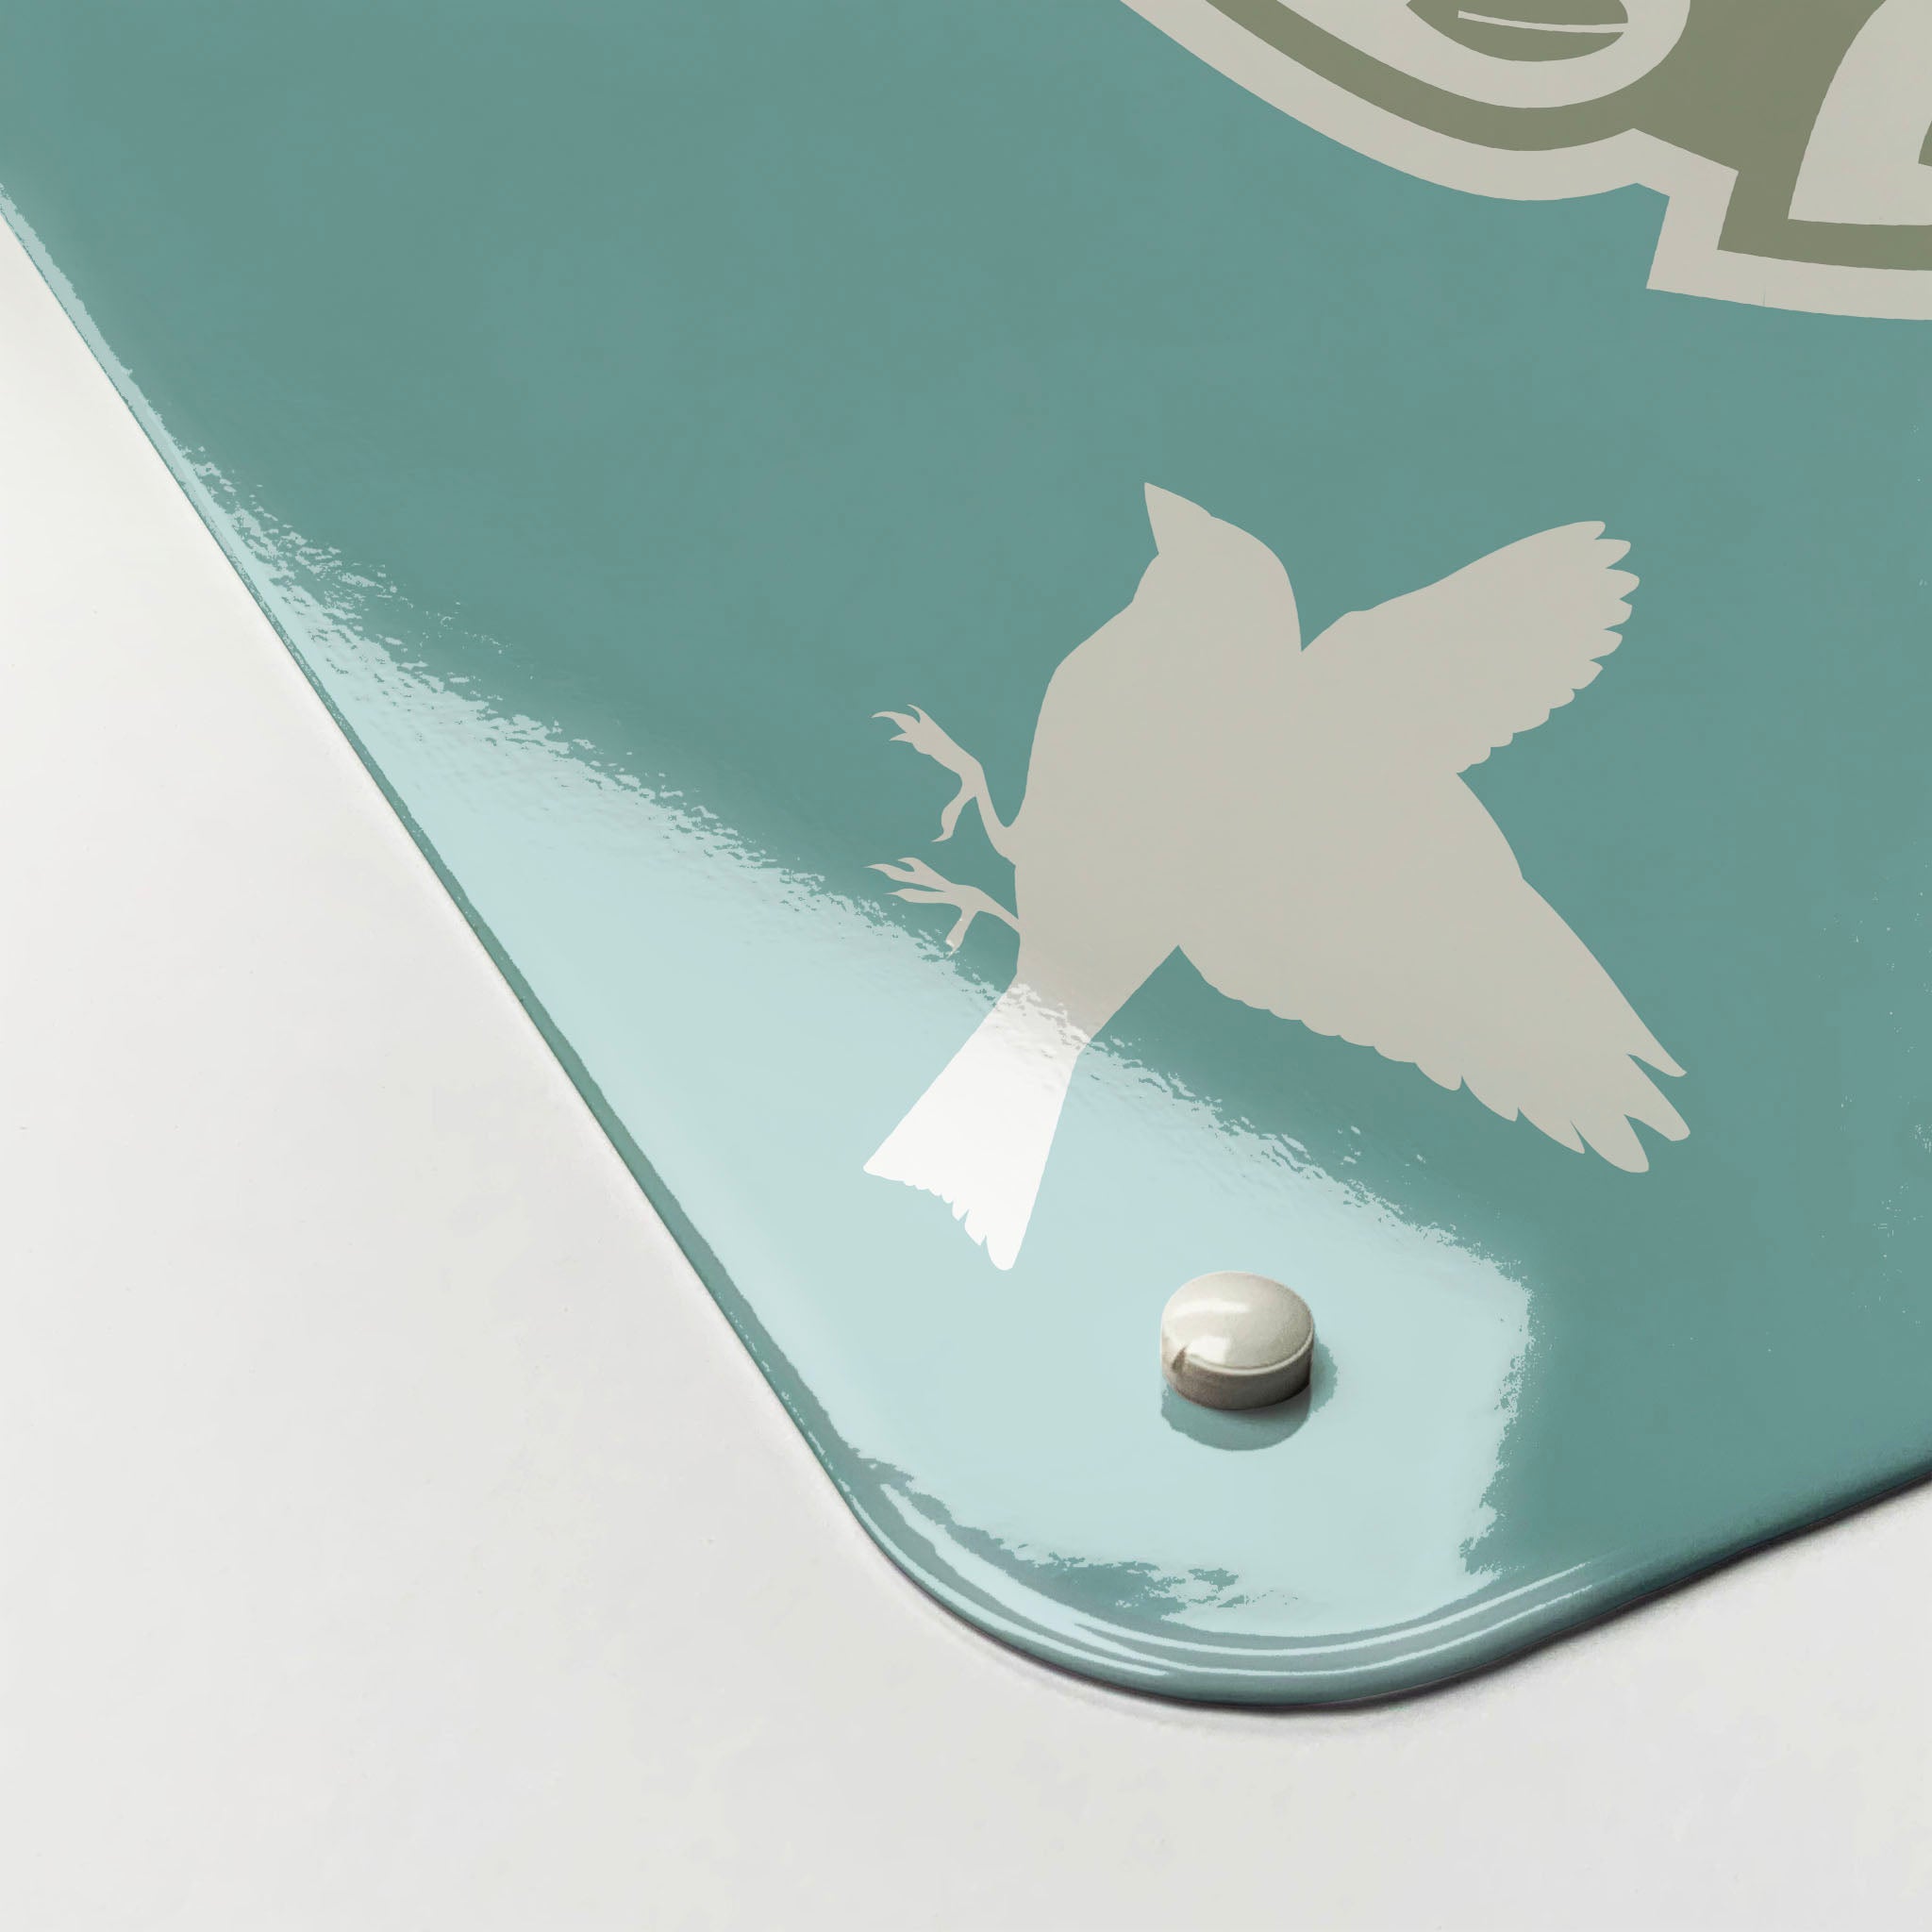 The corner detail of a blue birds in a tree design magnetic board to show it’s high gloss surface